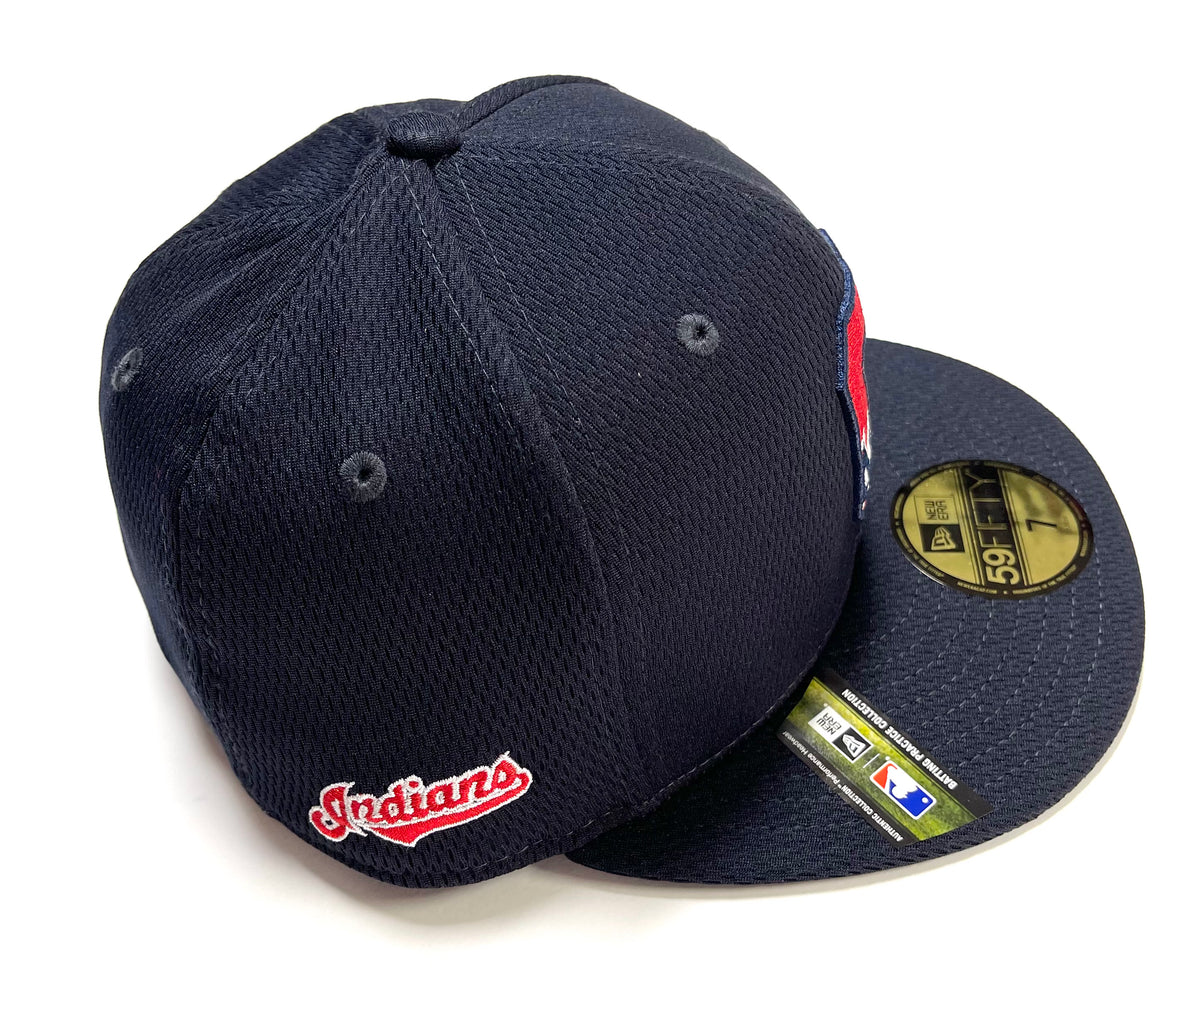 59Fifty Batting Practice Cleveland Cap by New Era --> Shop Hats